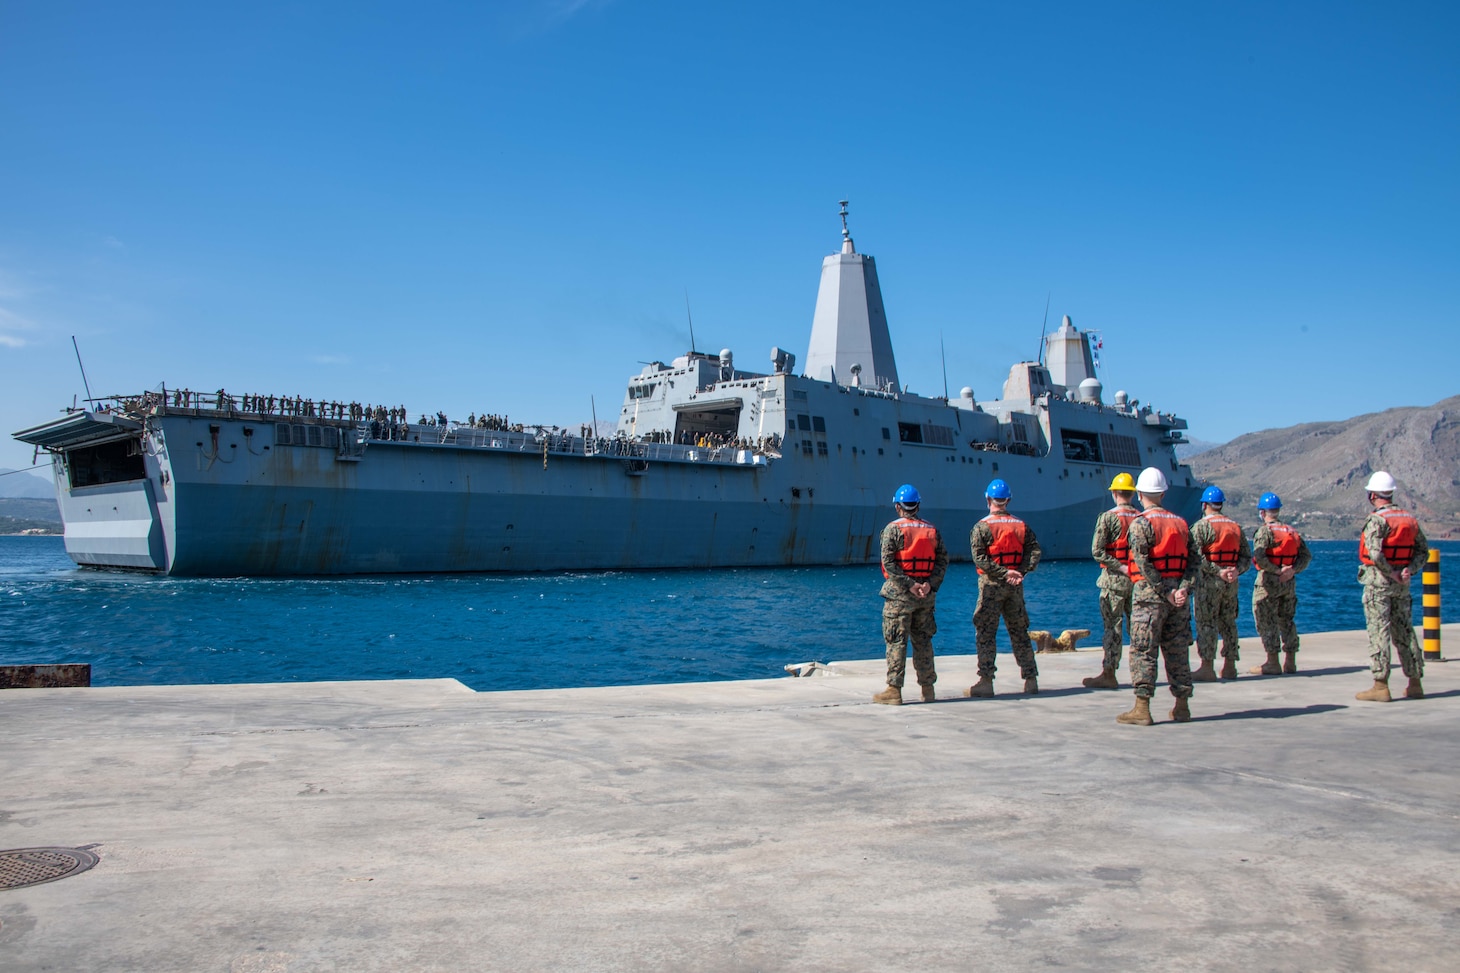 ) The amphibious transport dock ship USS San Antonio (LPD 17) arrives in Souda Bay, Greece, for a scheduled logistics and maintenance stop , May 27, 2021. San Antonio is operating in the U.S. Sixth Fleet area of operations with Amphibious Squadron 4 and the 24th Marine Expeditionary Unit (MEU) as part of the Iwo Jima Amphibious Readiness Group. NSA Souda Bay is an operational ashore base that enables U.S., allied, and partner nation forces to be where they are needed when they are needed to ensure security and stability in Europe, Africa, and Southwest Asia.